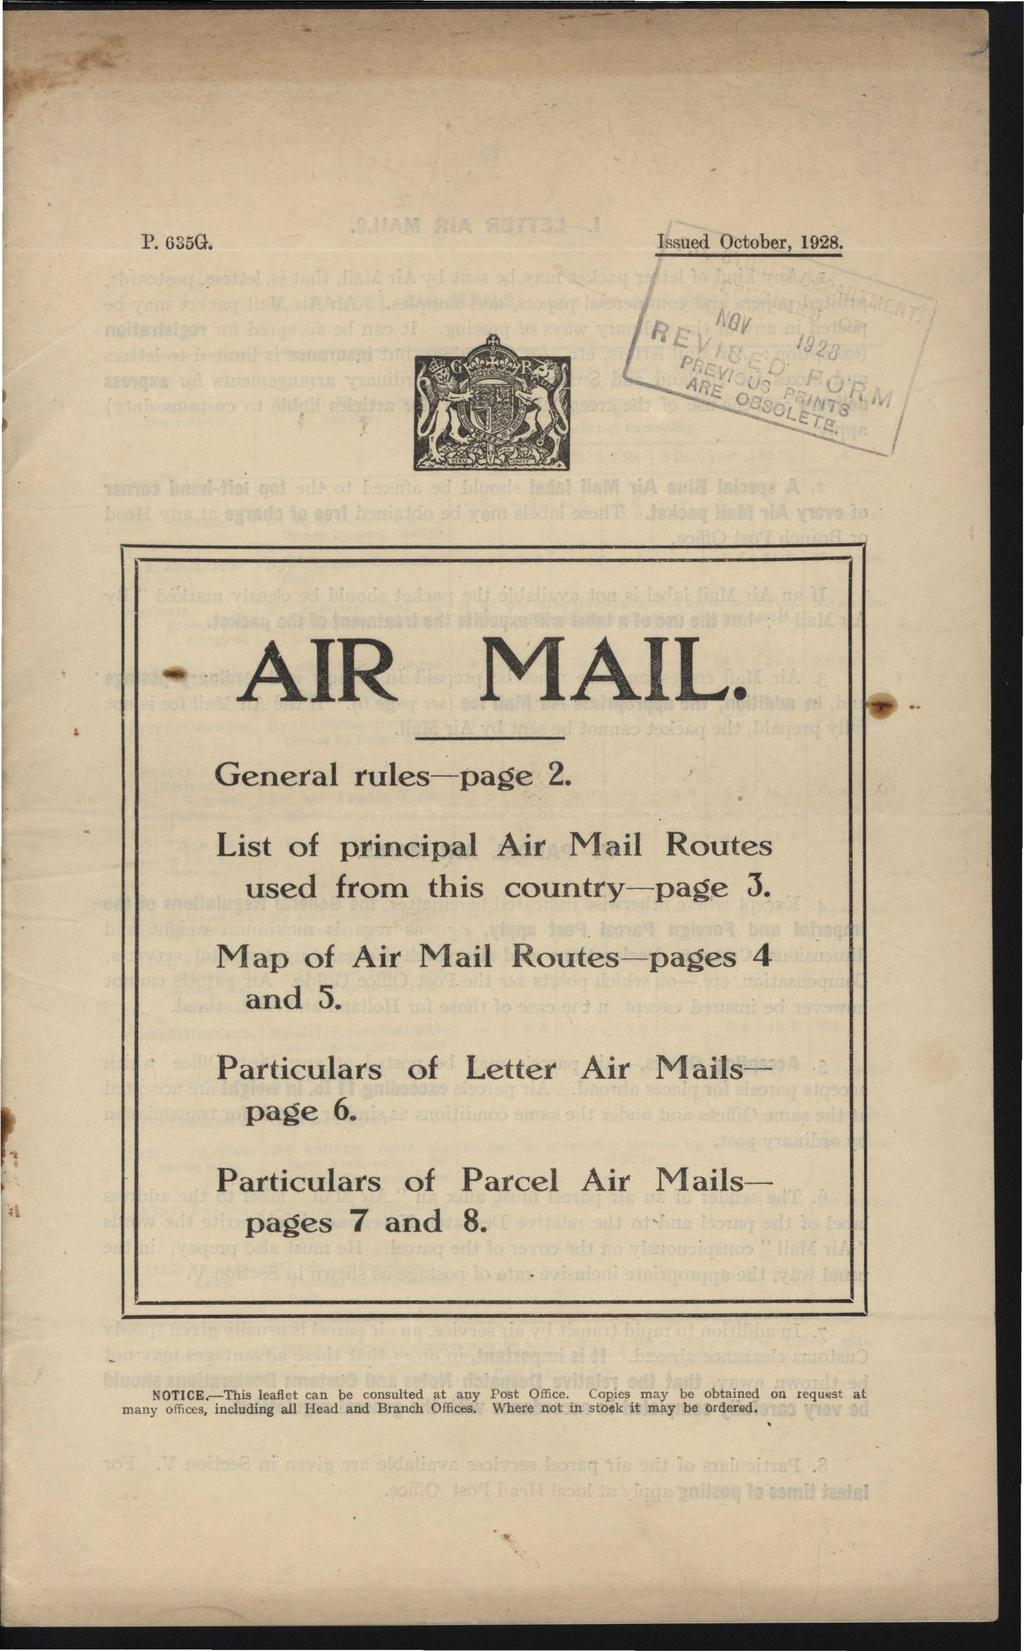 P 635G Issued October, 1928 AIR MAIL General rules- page 2 List of principal Air Mail Routes used from this country-page J Map of Air Mail Routes- pages 4 and 5 Particulars of Letter Air Mailspage 6